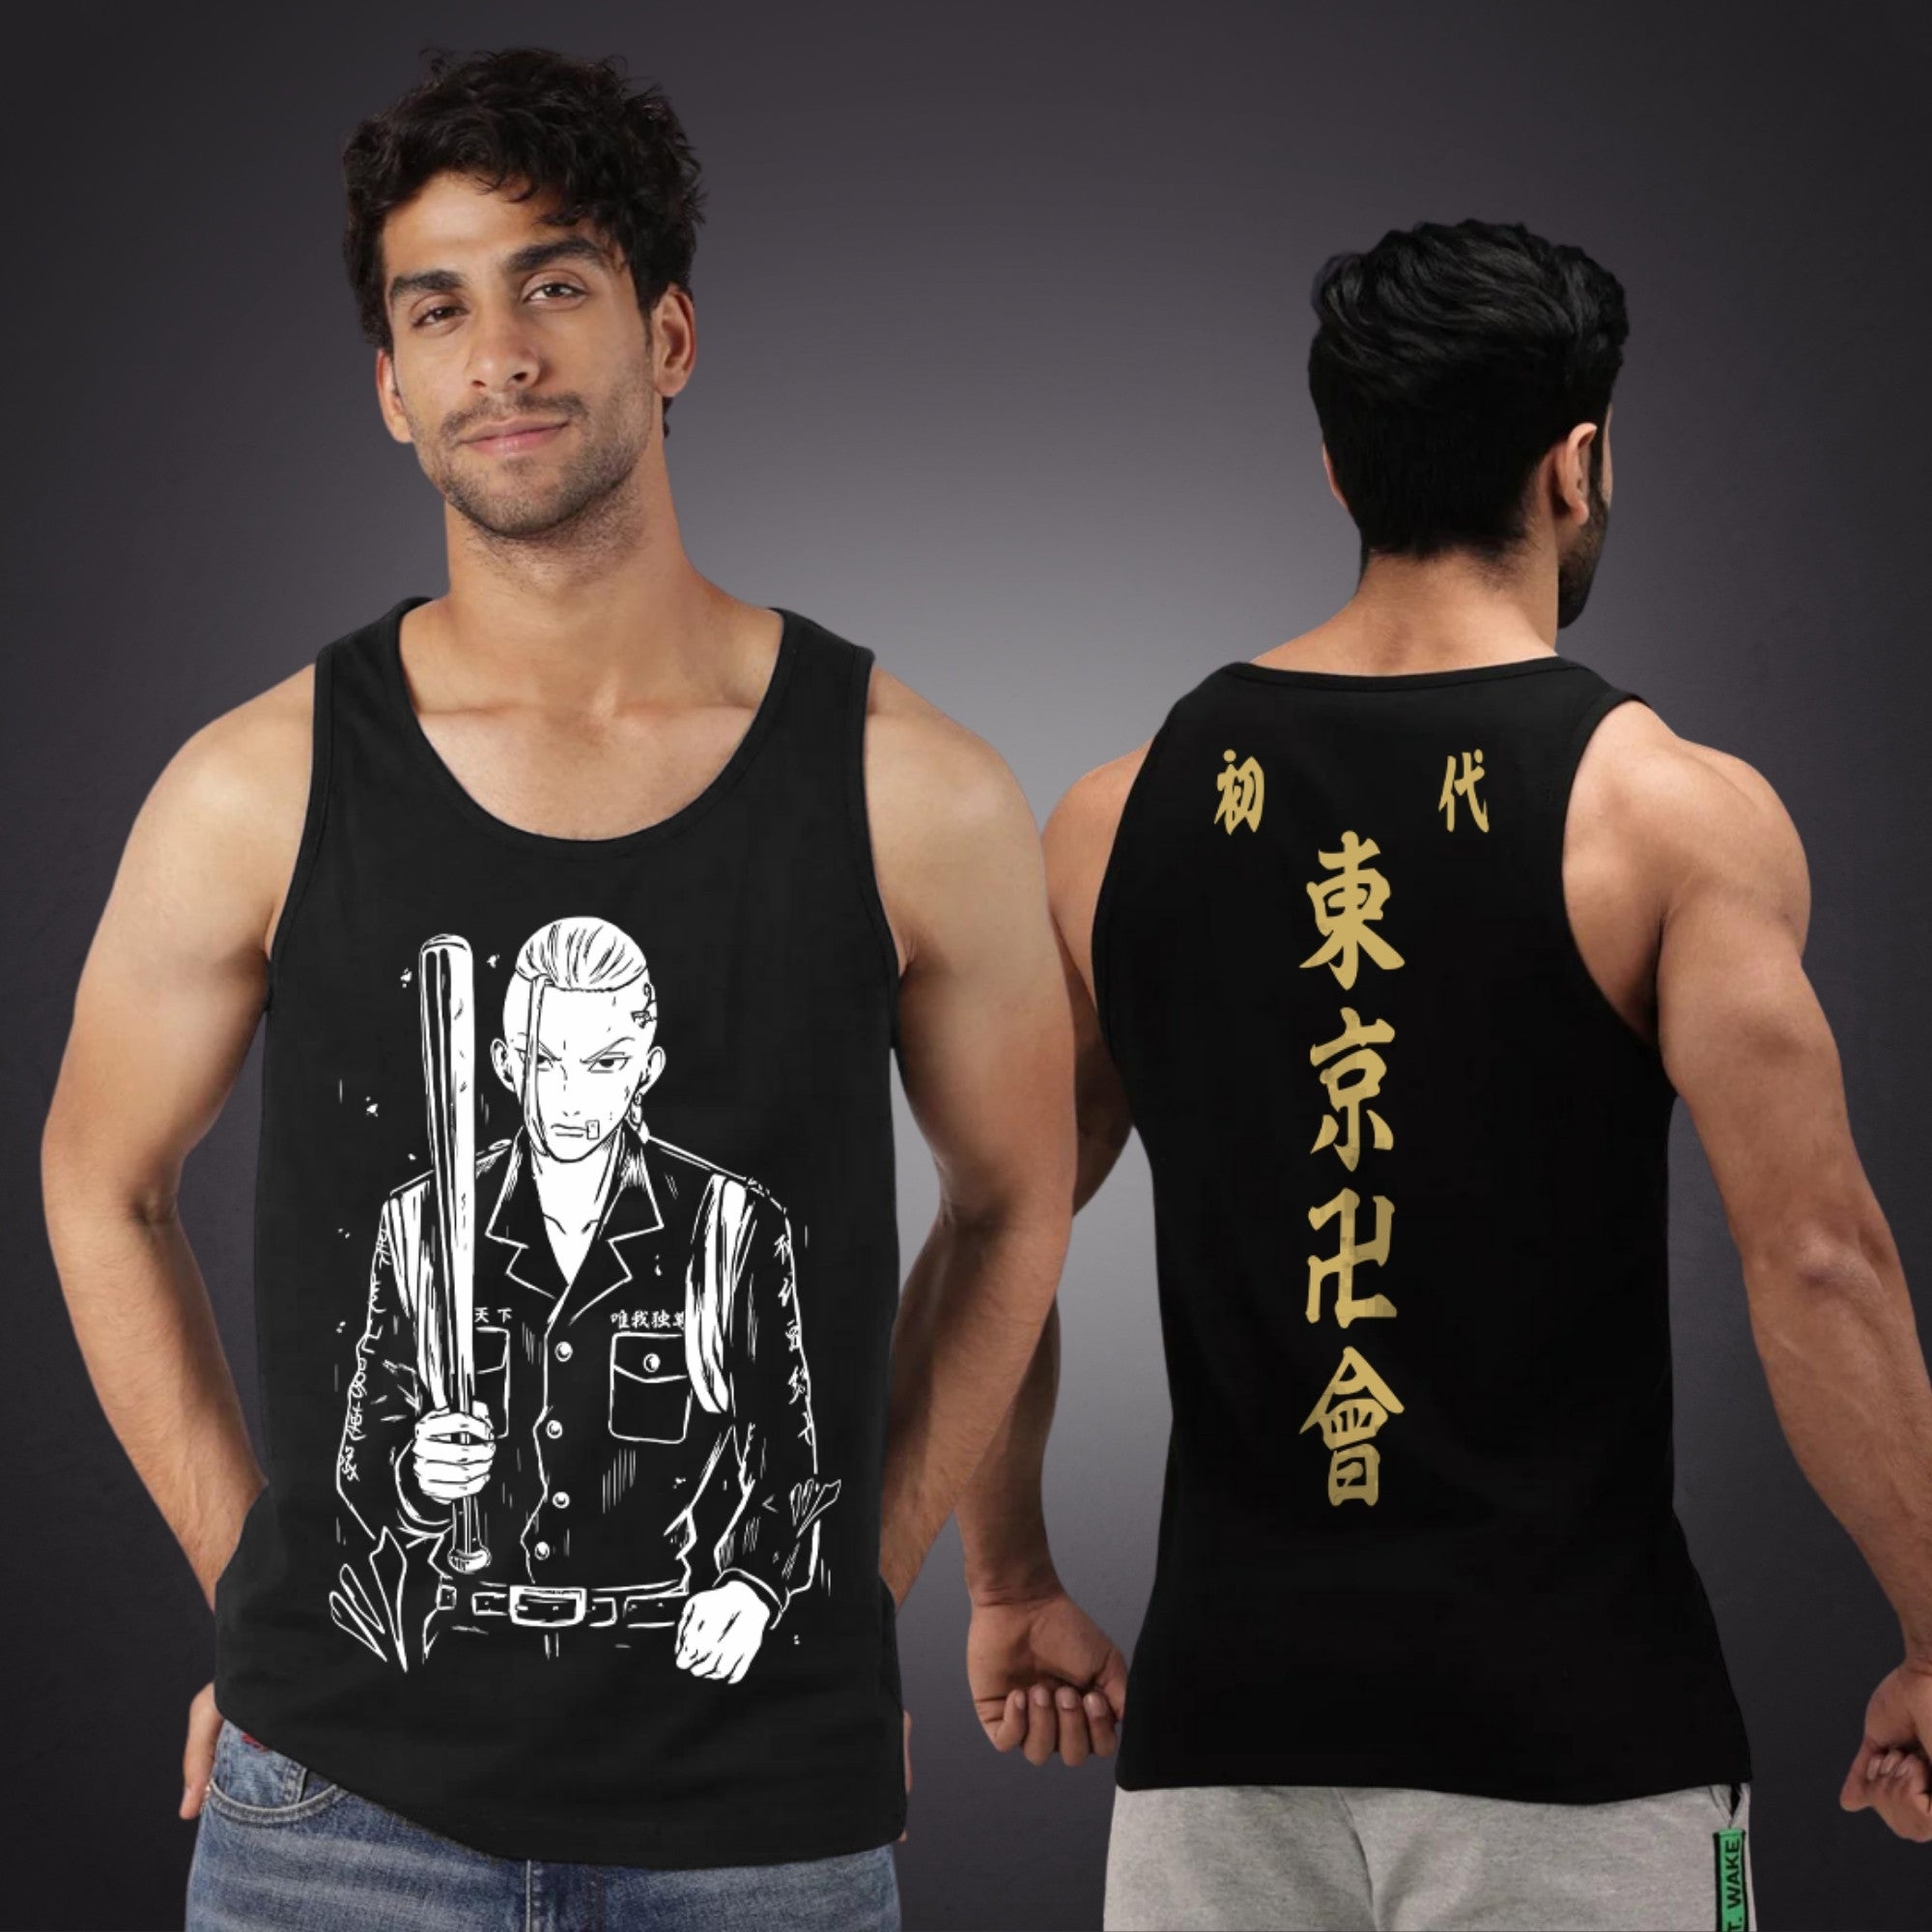 Mens Anime Tank Top Gym Bodybuilding Lightweight Sleeveless Breathable  Vest Tees S at Amazon Mens Clothing store